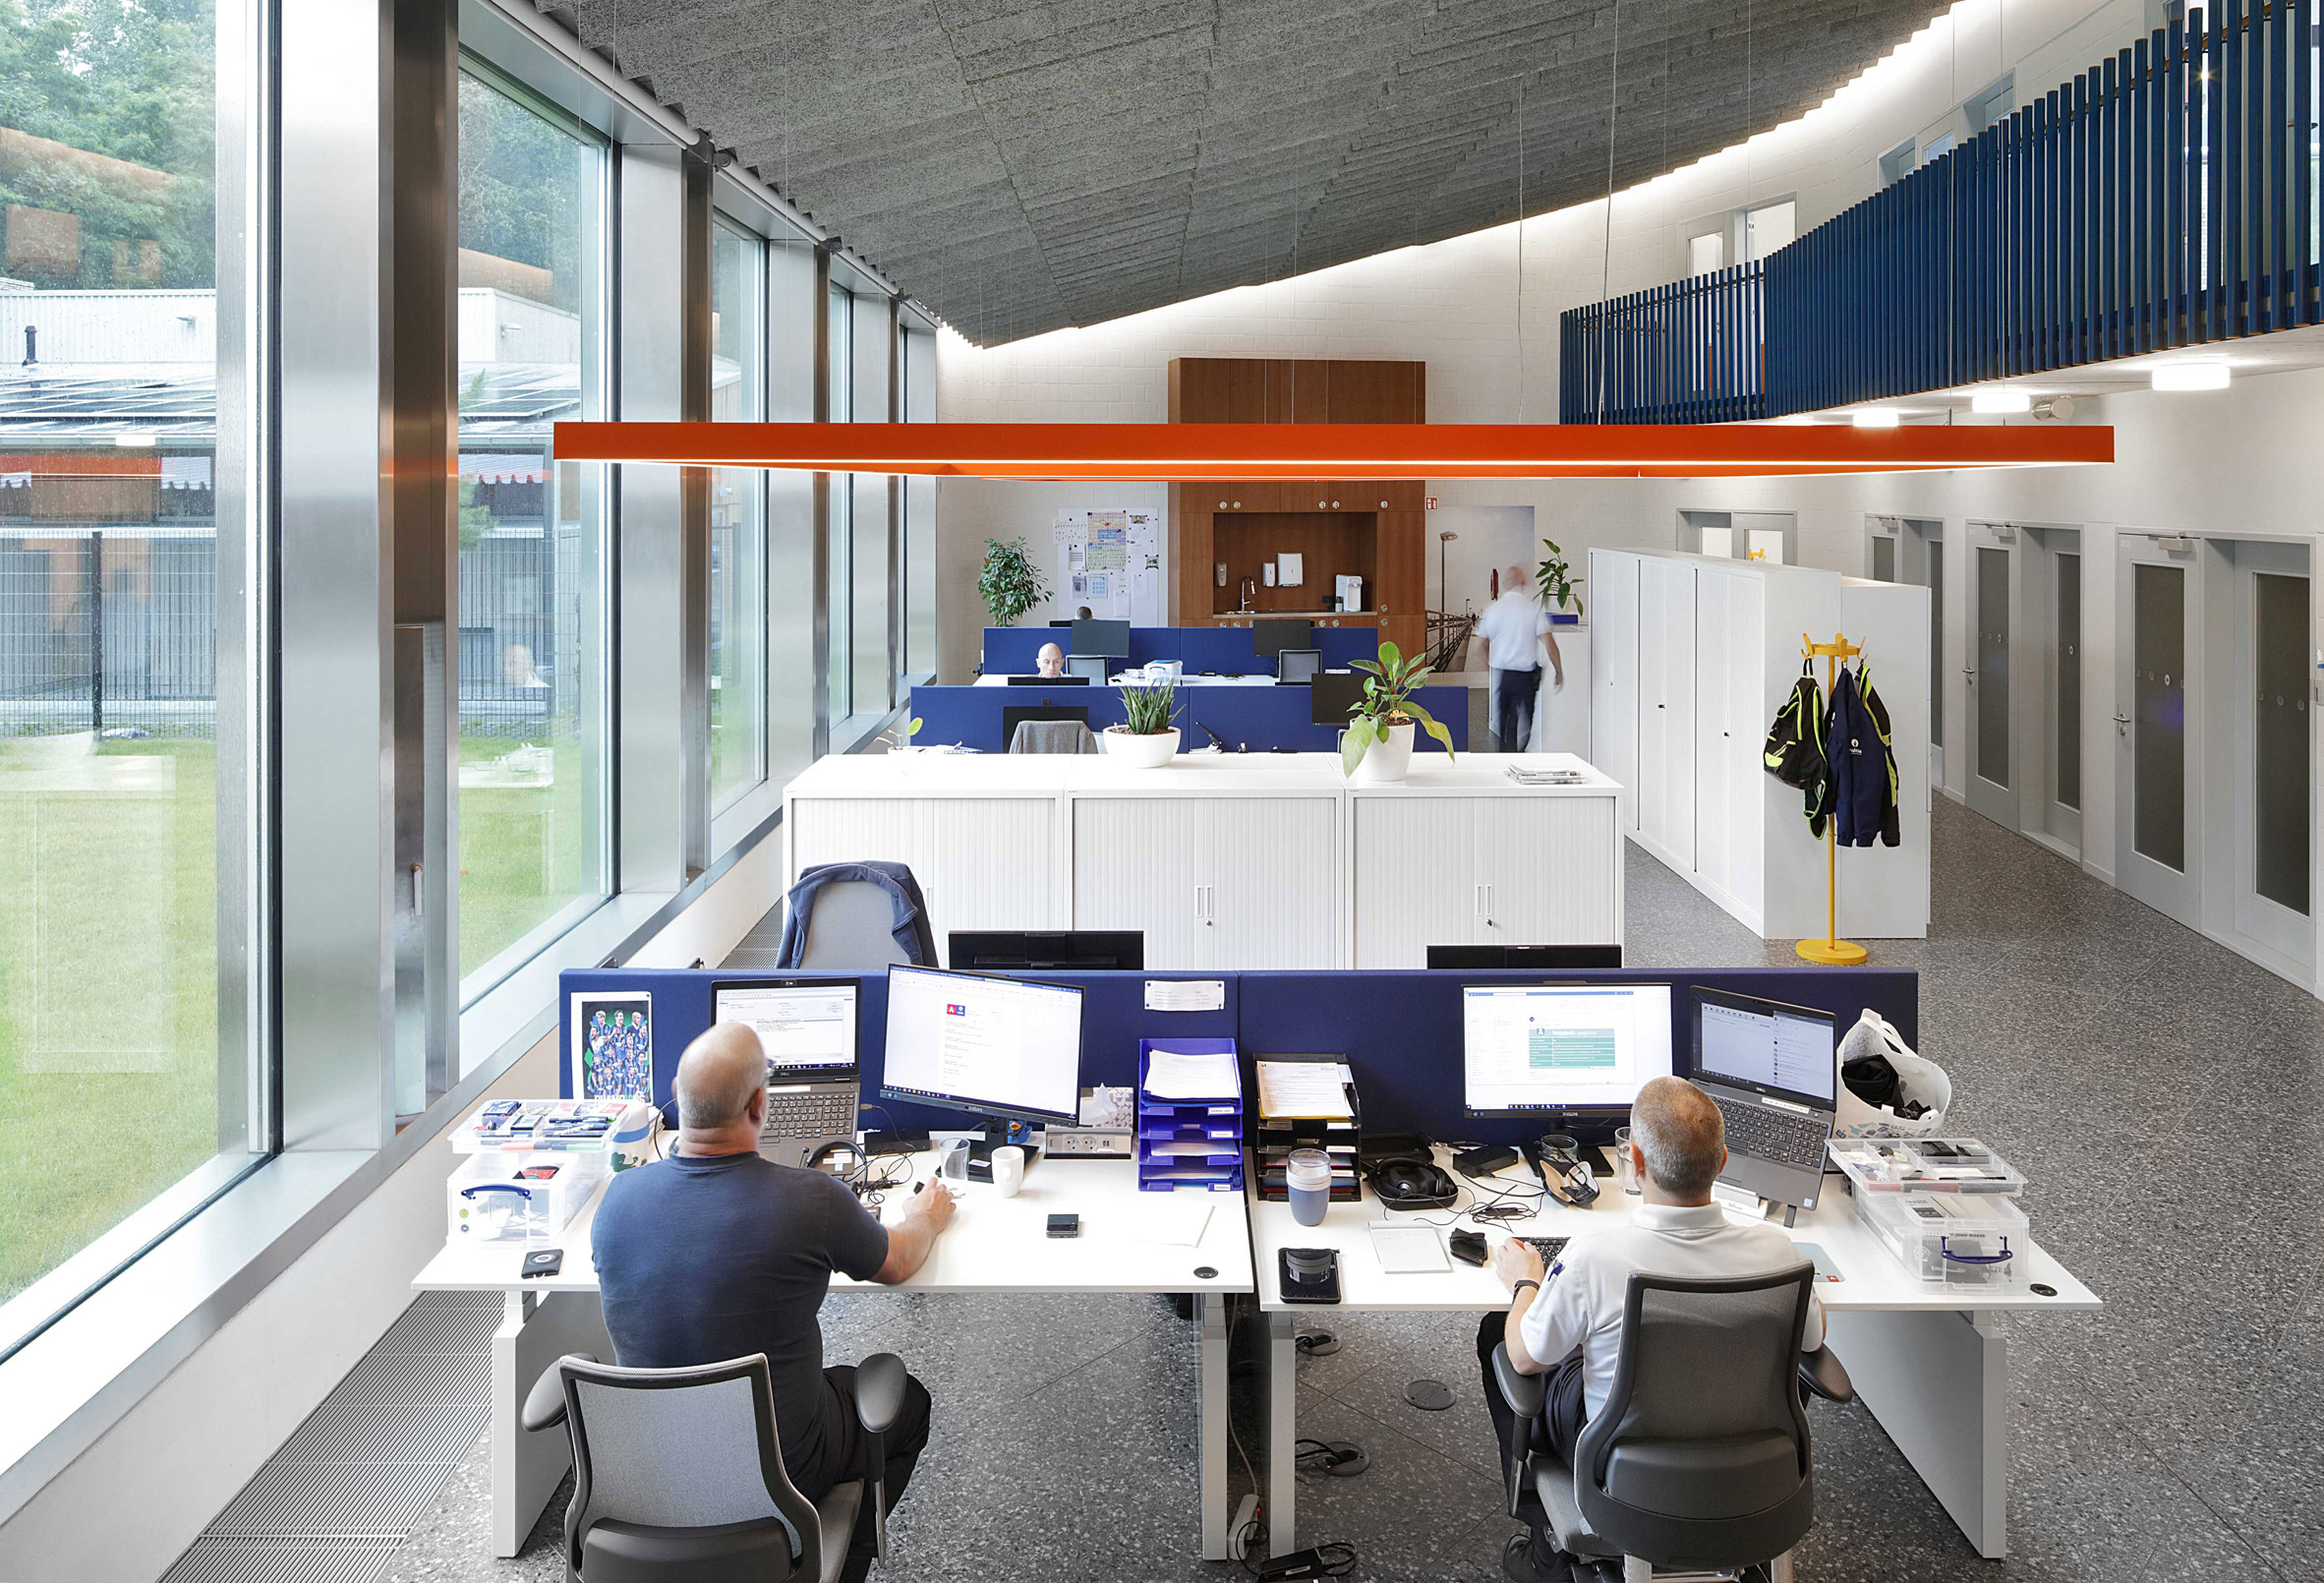 Interior of a Antwerp police office by Bovenbouw Architectuur